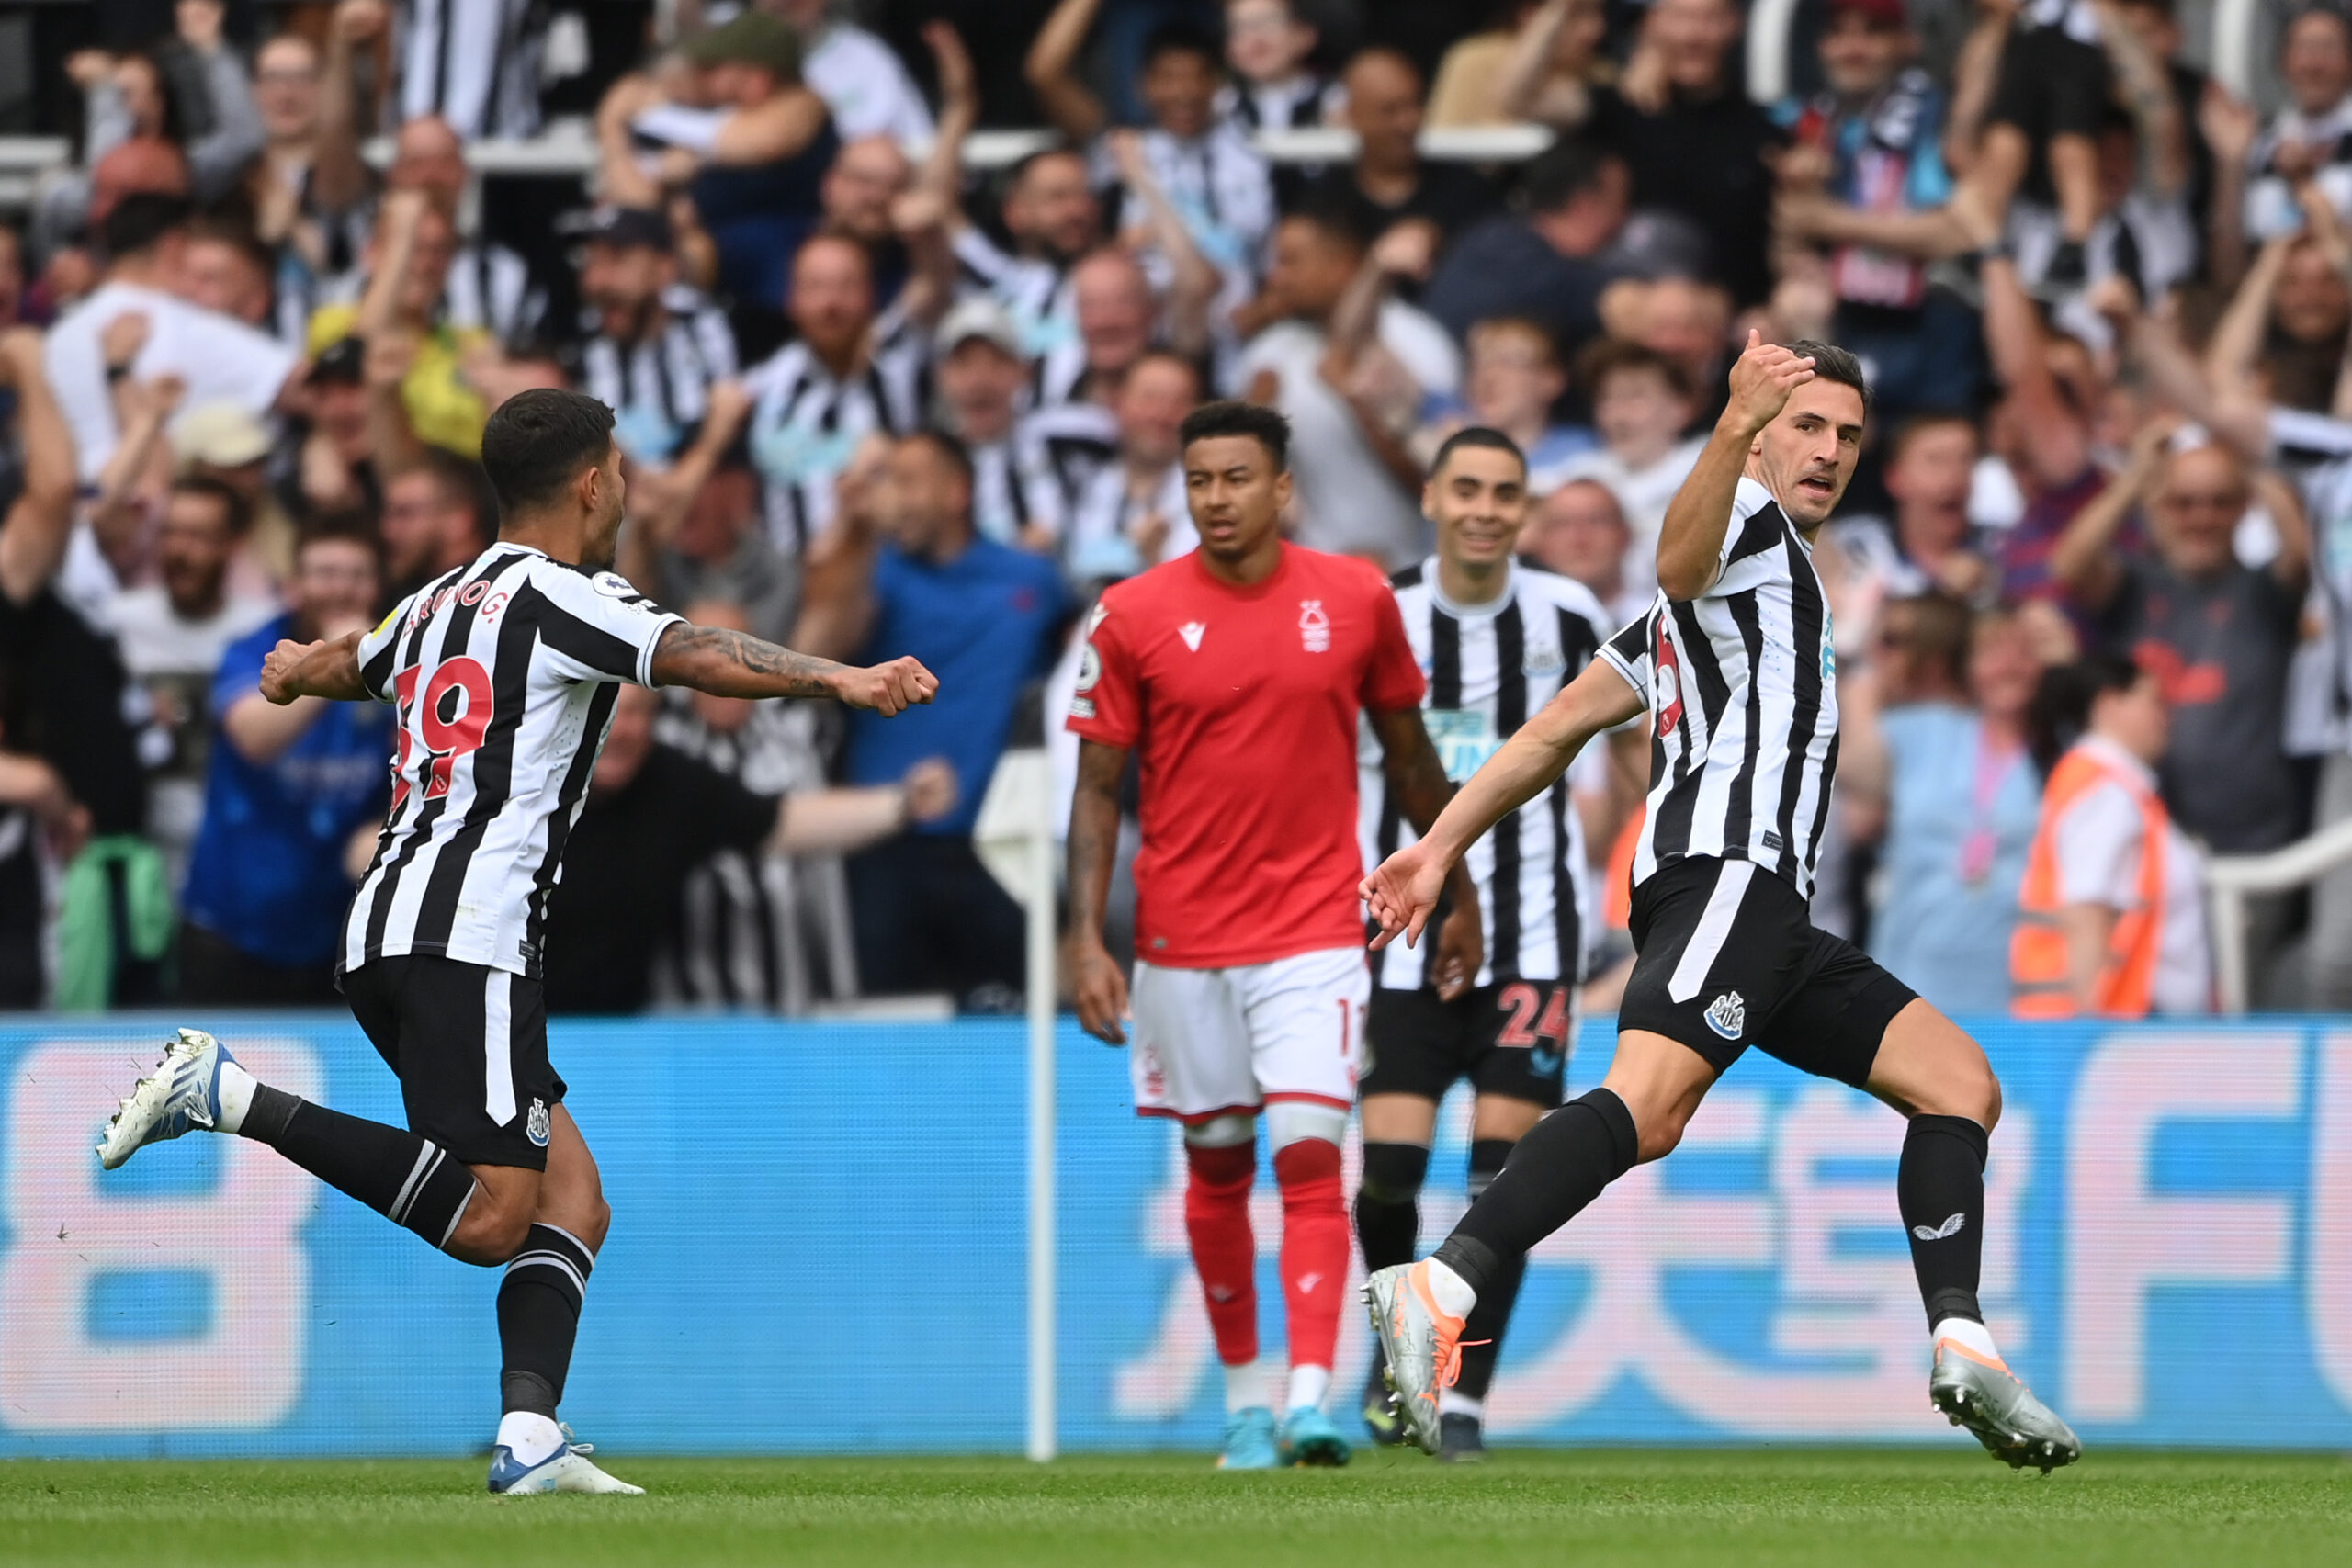 Newcastle 2-0 Nottingham Forest: Top class Toon dominate from start to finish